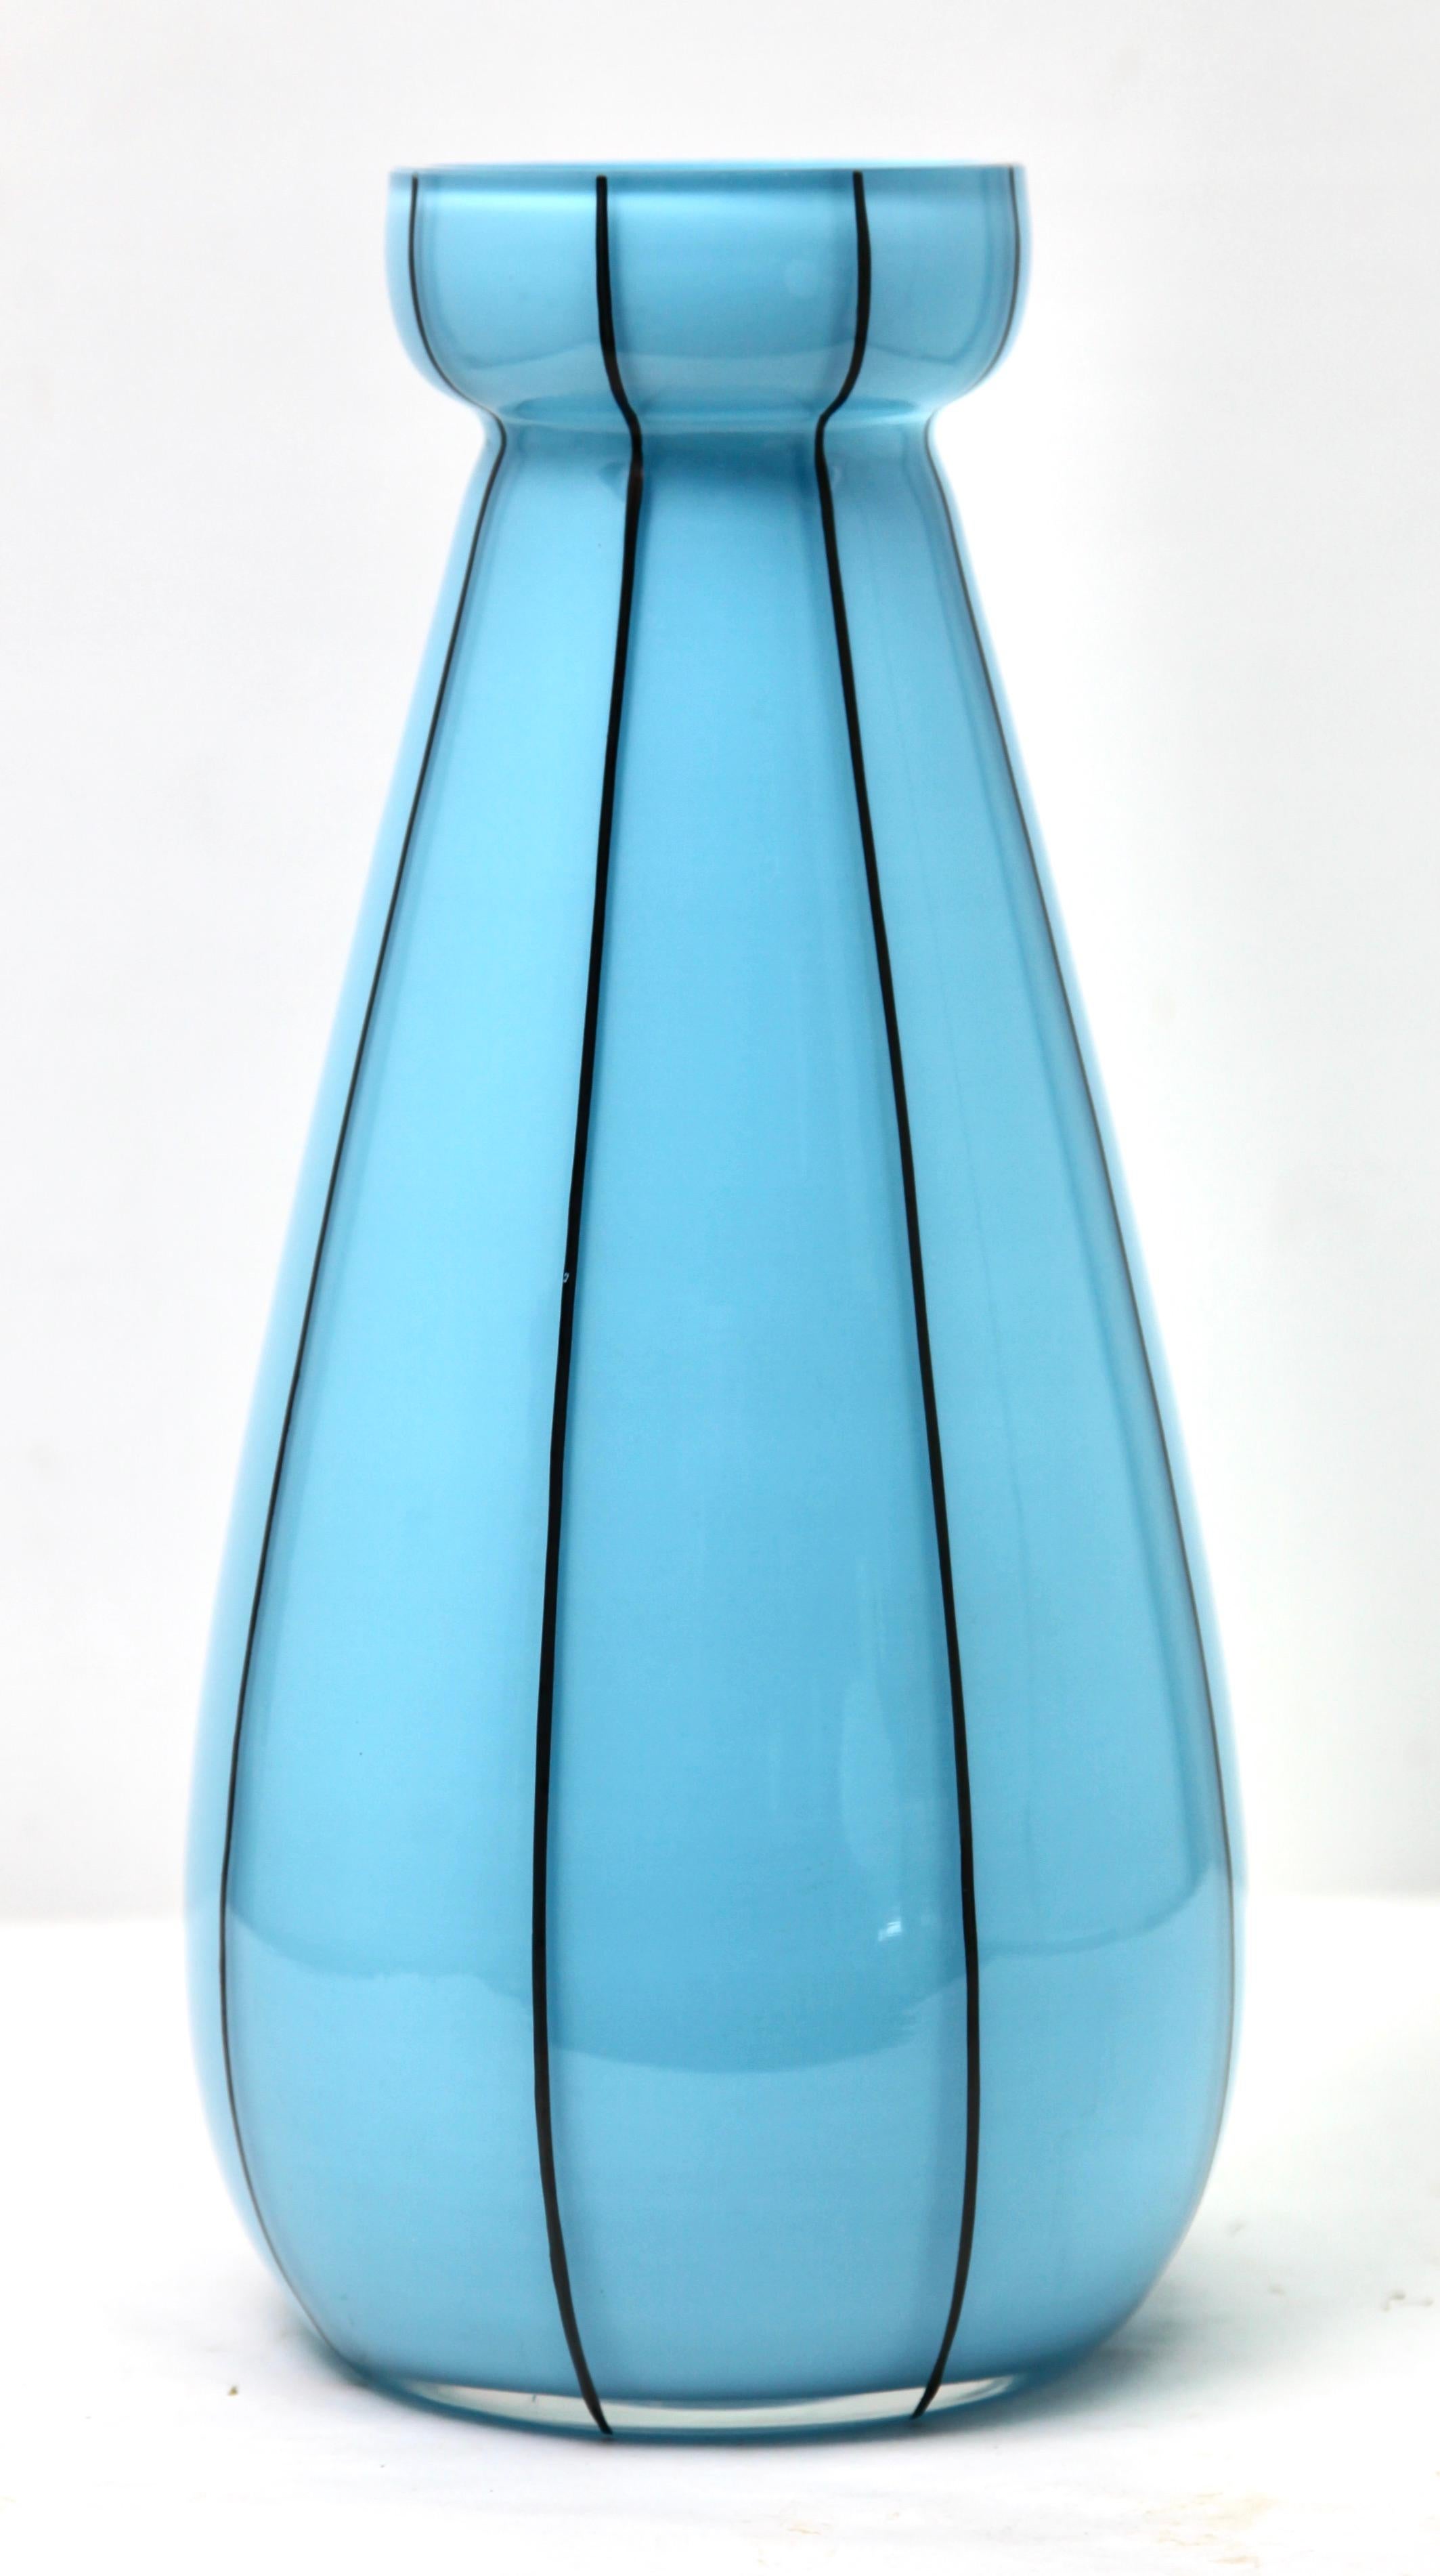 Opaline glass vases in baby blue, France, circa 1950

French opaline vase in opaque baby blue glass.
The hand painted decorated vase comes from circa 1950. 
This unusual color and design makes it much sought after.
 In good condition with such